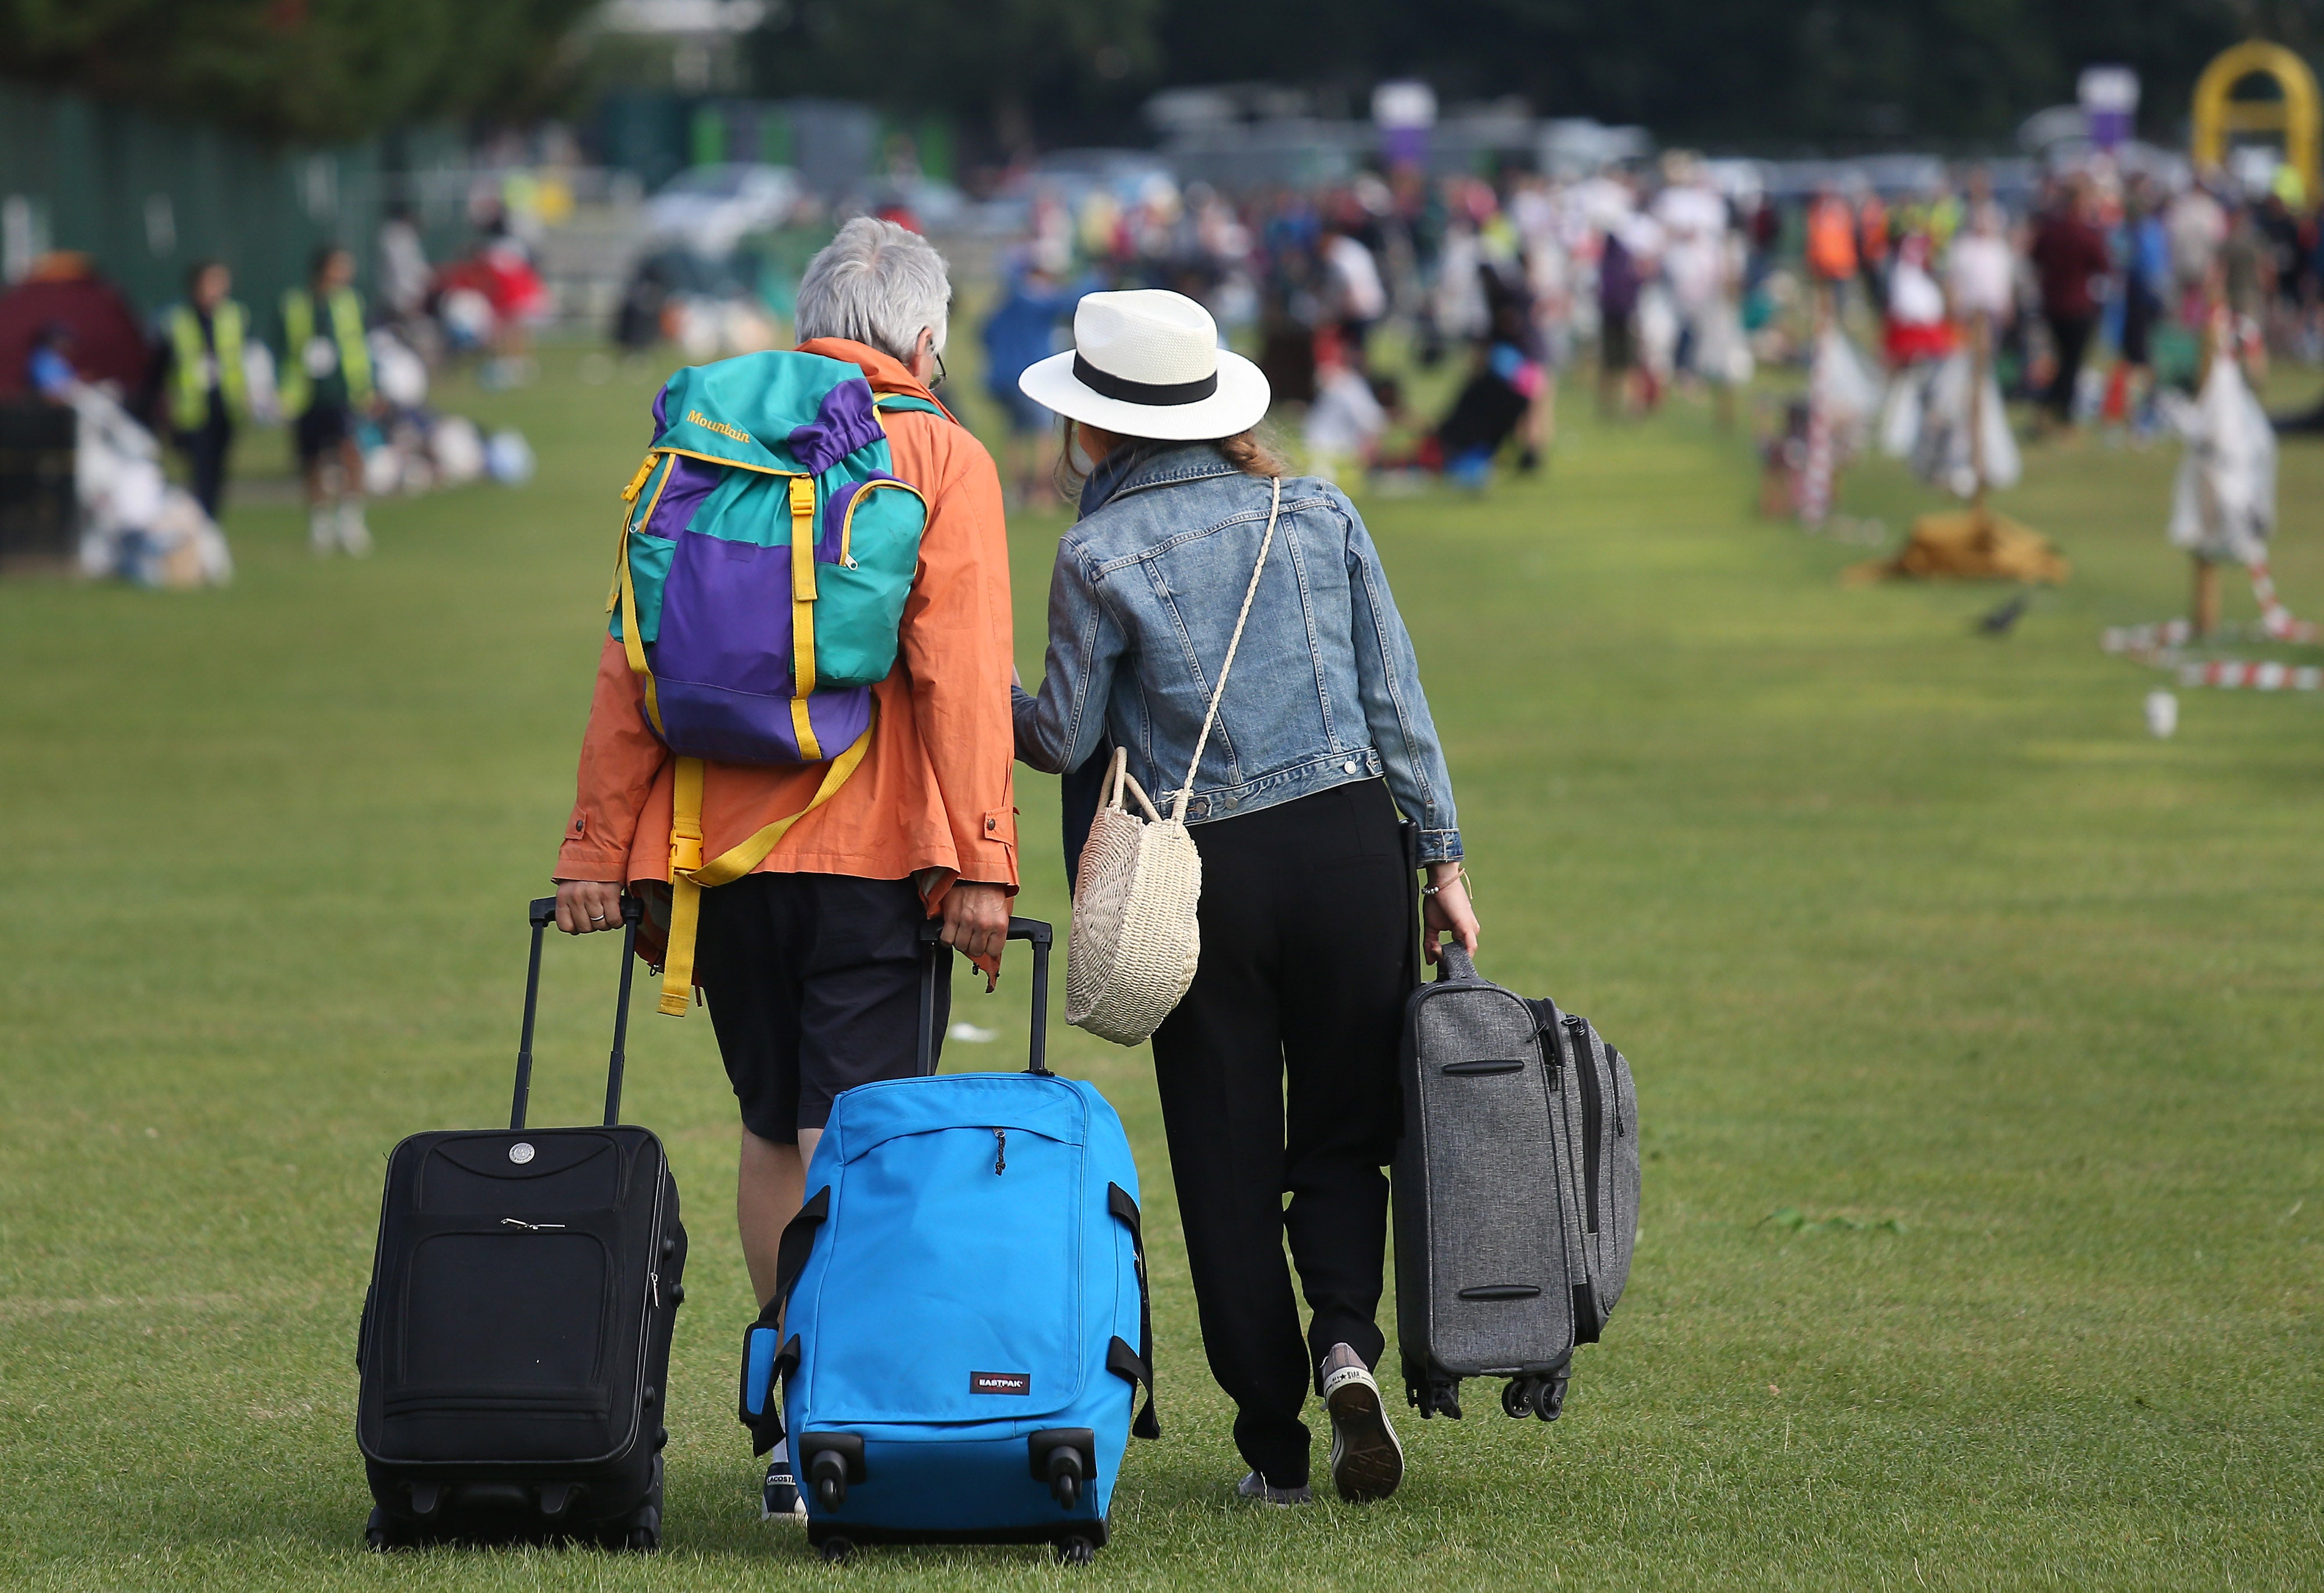 A man and woman pull suitcases across grass